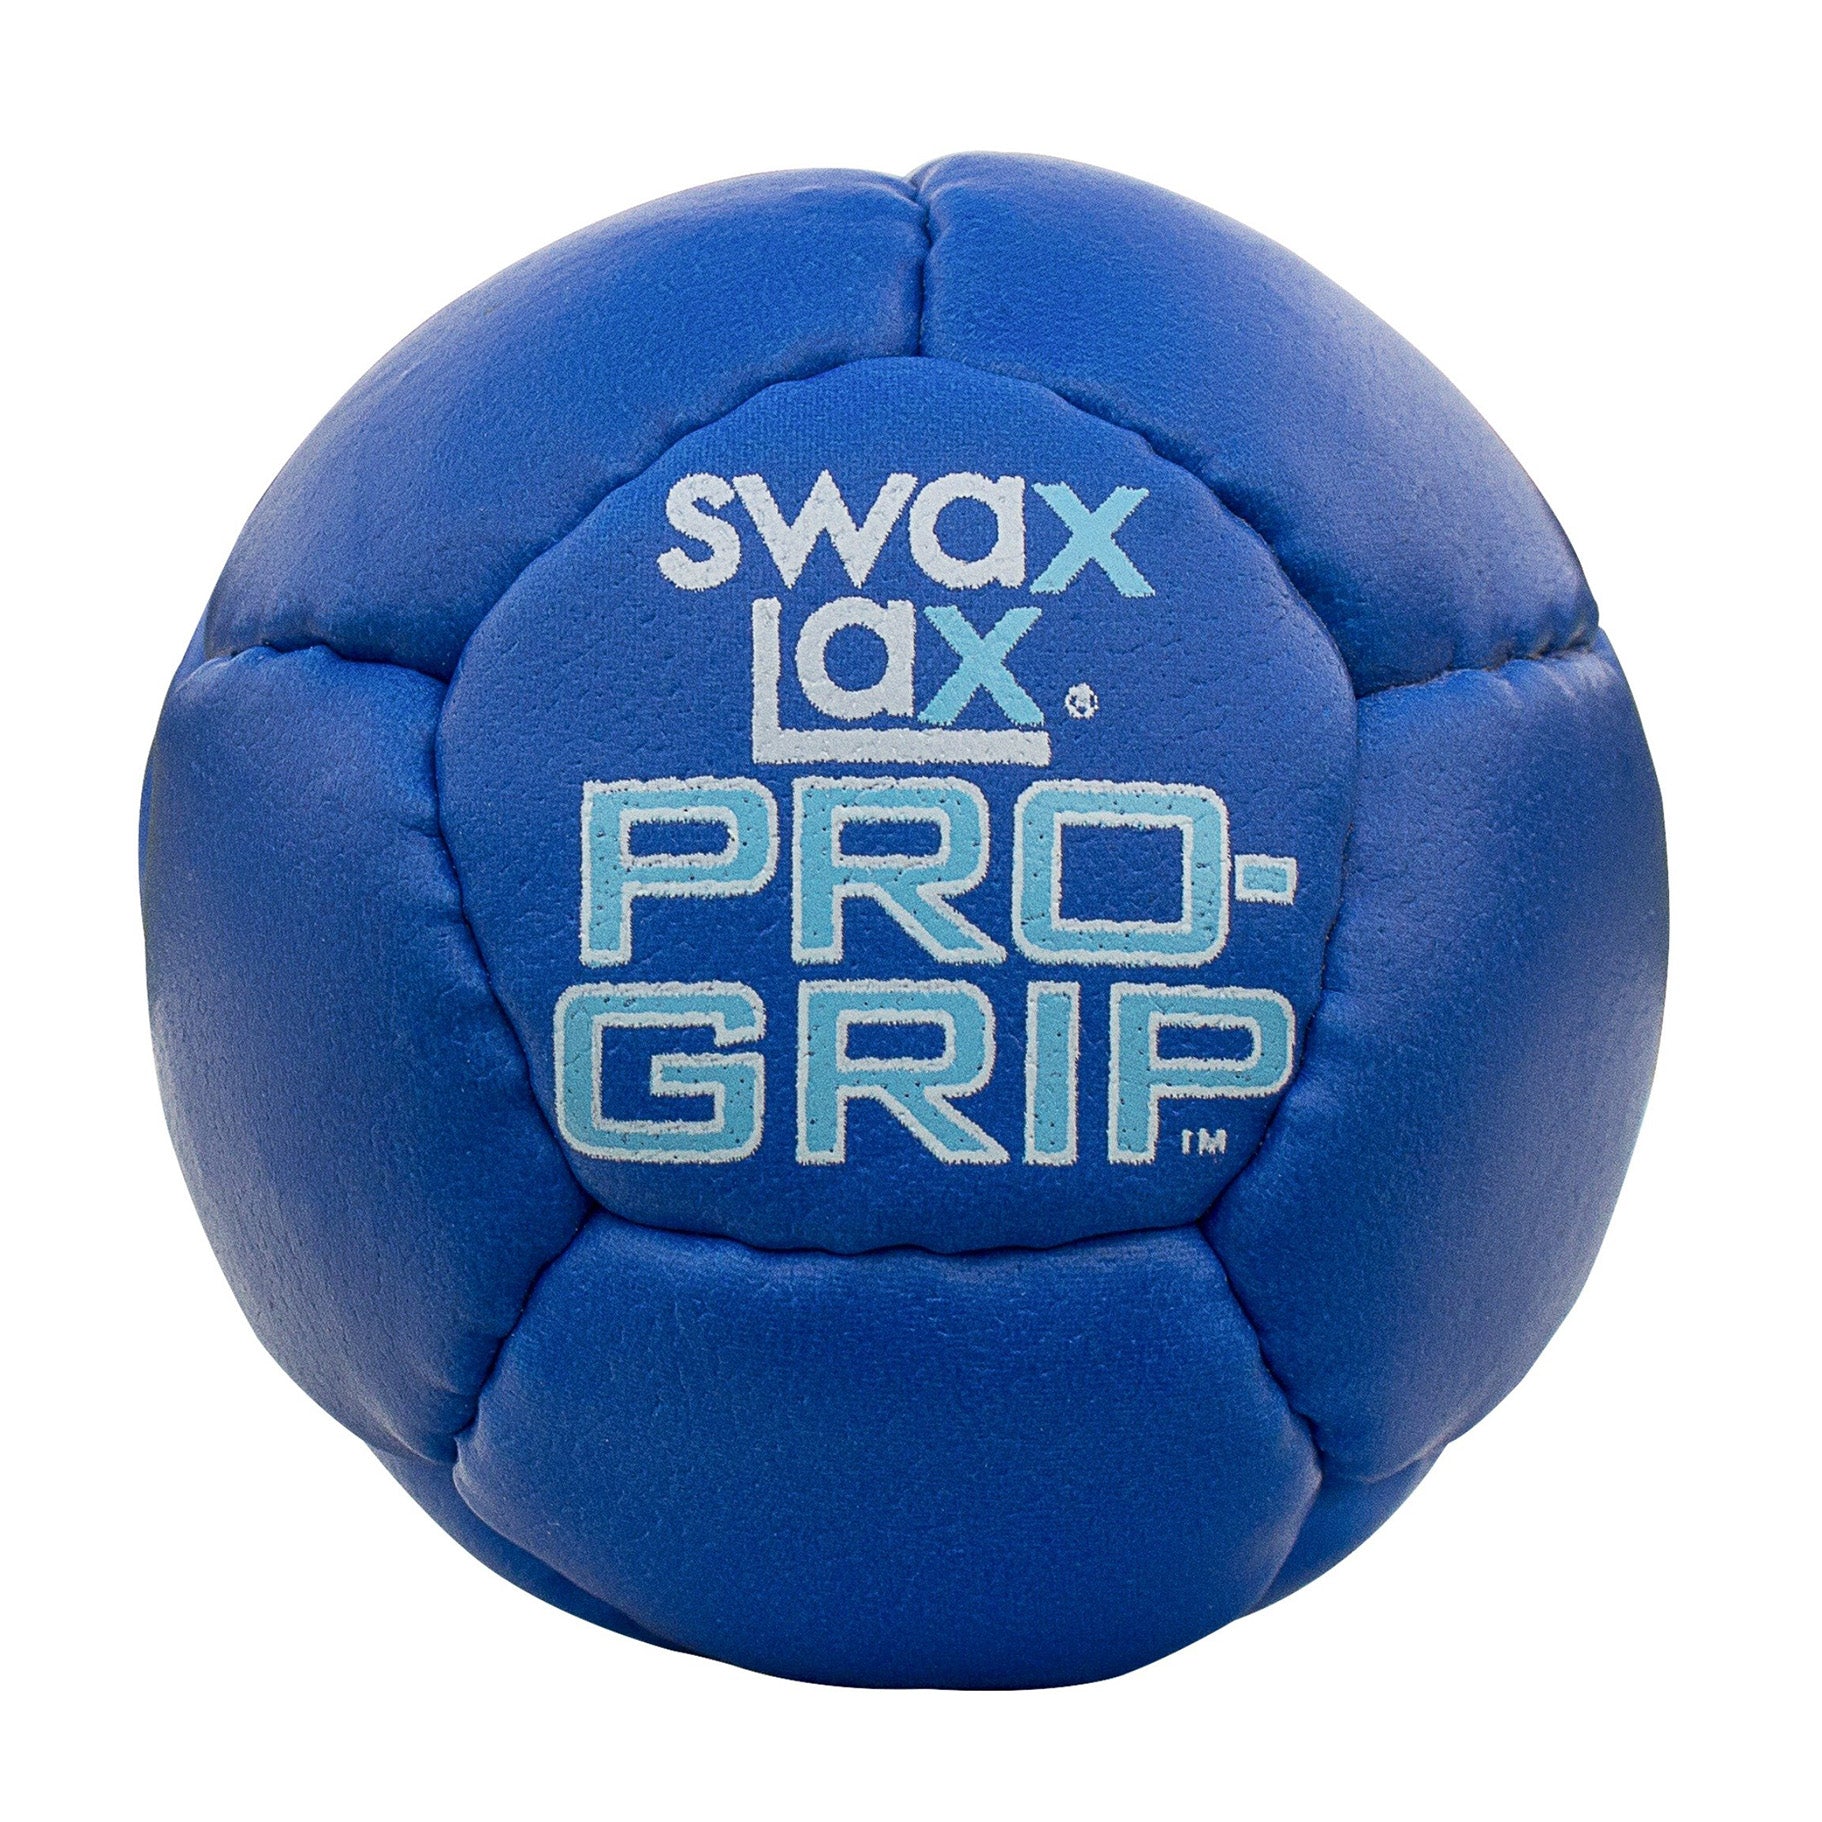 Blue Pro-Grip Swax Lax lacrosse training ball with tacky texture